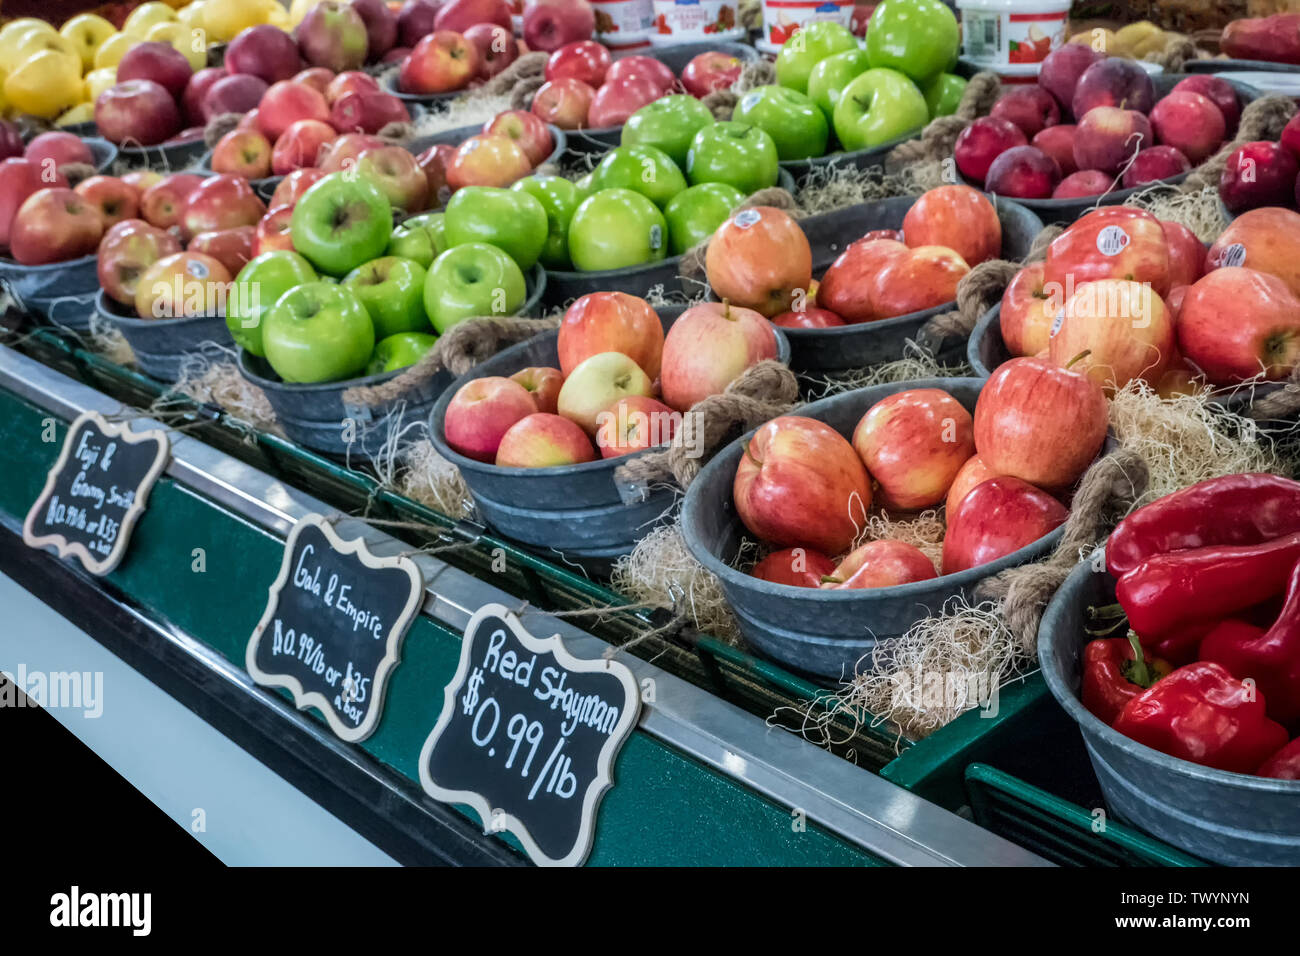 Wenatchee, Washington, USA.  Refrigerated display case of freshly harvested locally grown apples for sale at a produce stand. Stock Photo